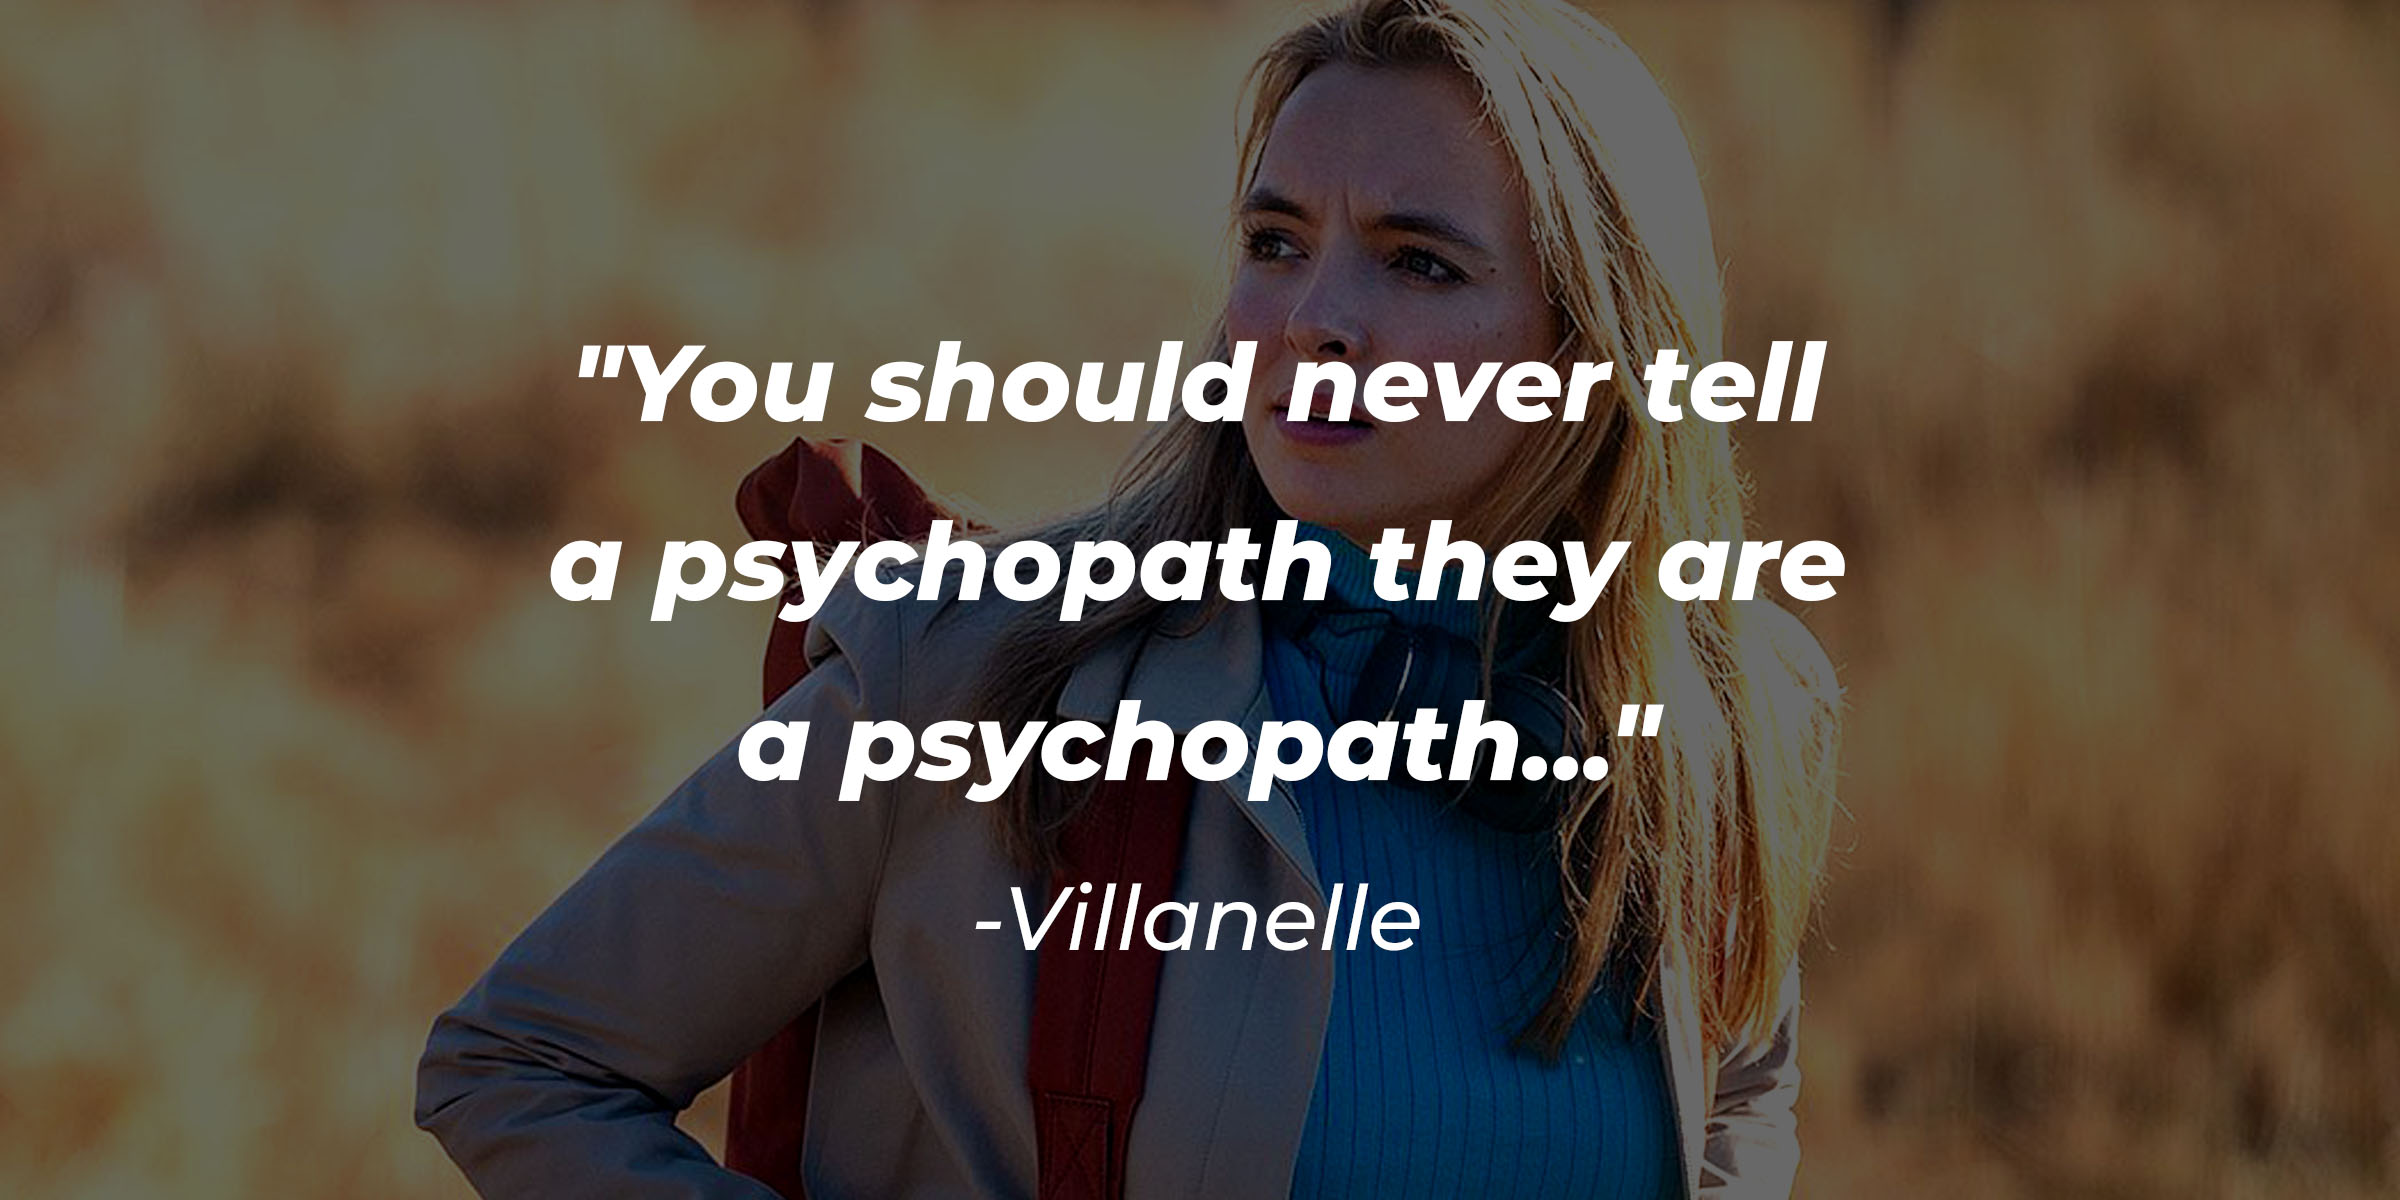 Villanelle's quote: "You should never tell a psychopath they are a psychopath..." | Source: Facebook/KillingEveBBCA